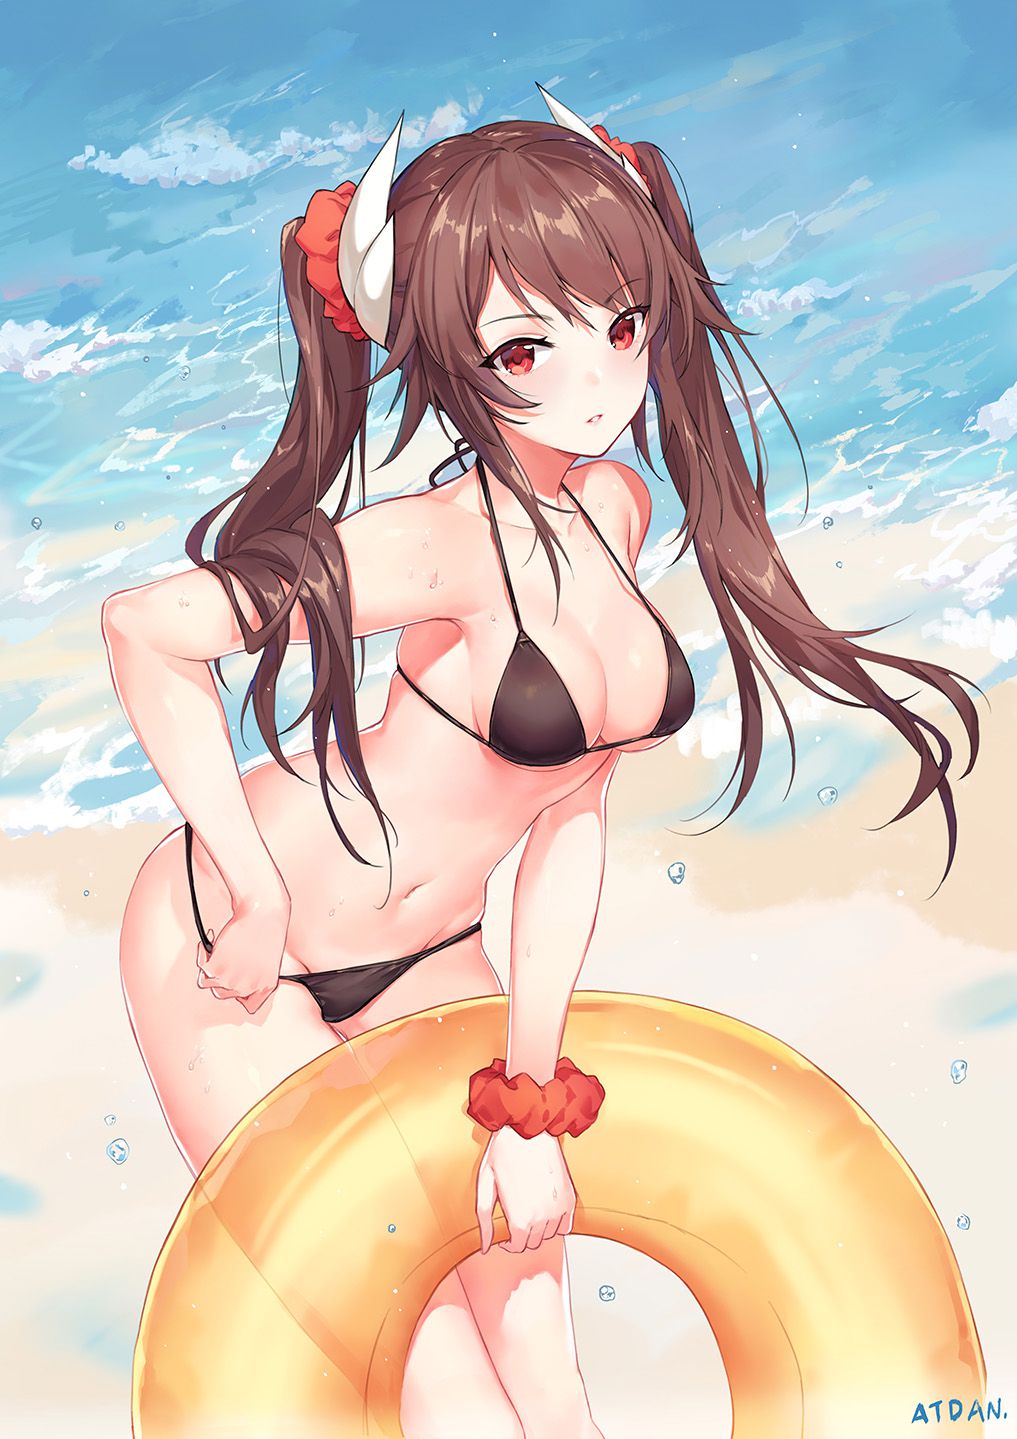 [Secondary] Moe images of swimsuit girls bathing in the sea and swimming pool 15